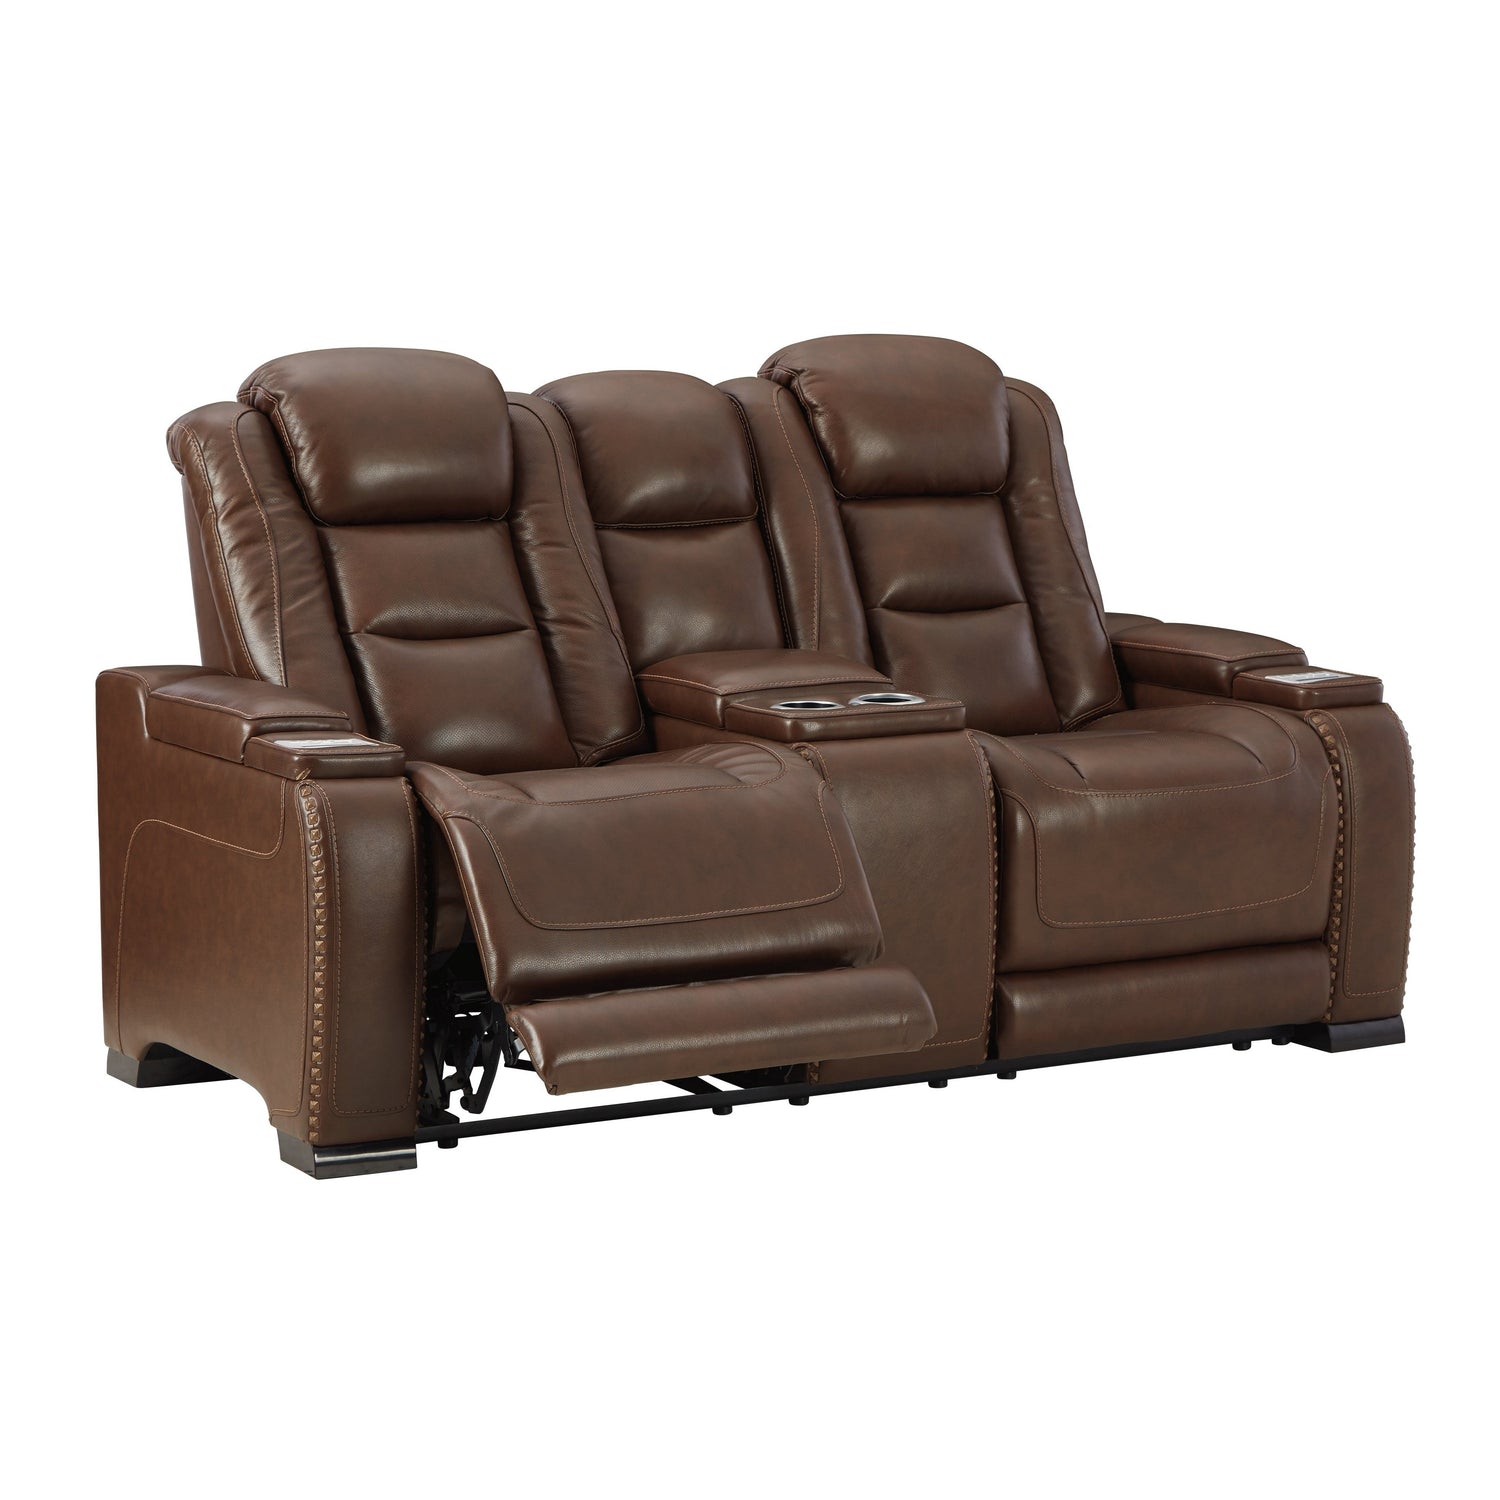 The Man-Den Power Reclining Loveseat with Console Ash-U8530618